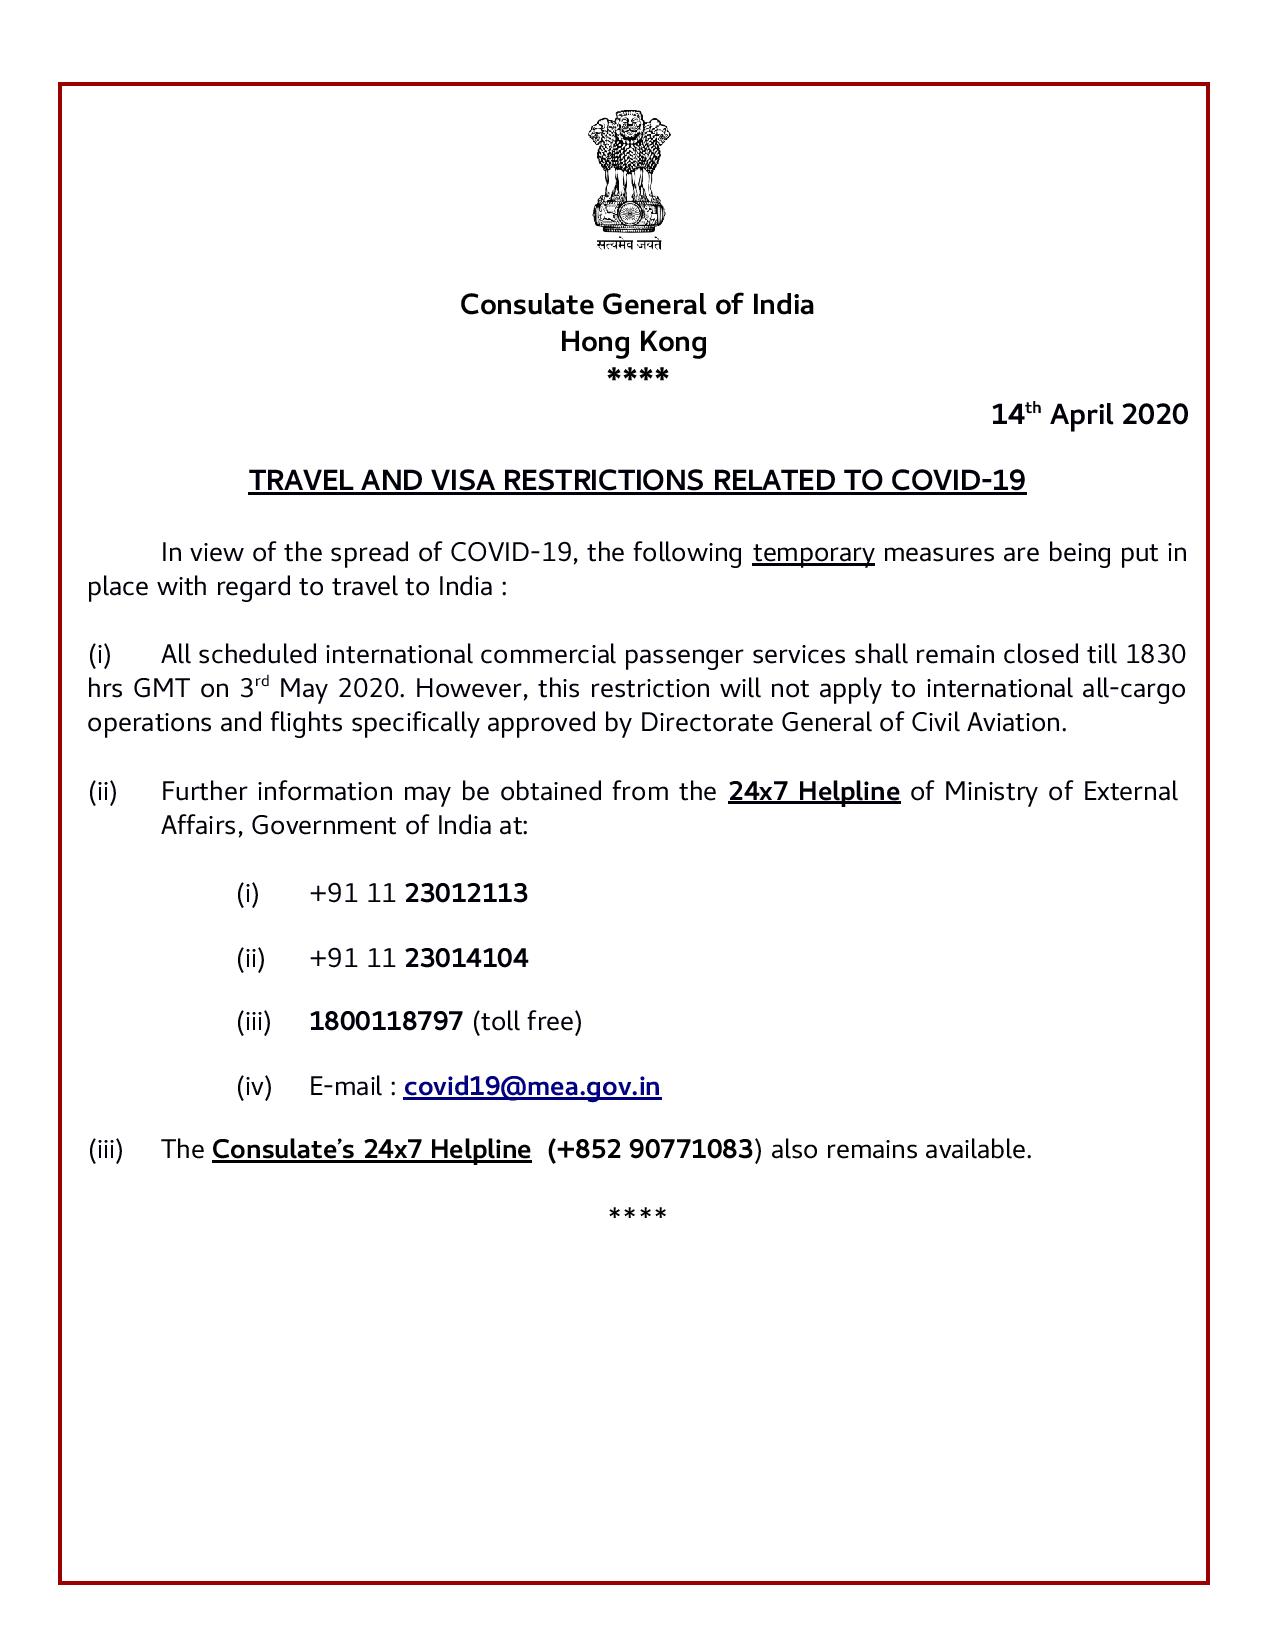 Advisory with regard to travel to India: All scheduled international commercial passenger services shall remain closed till 3rd May 2020